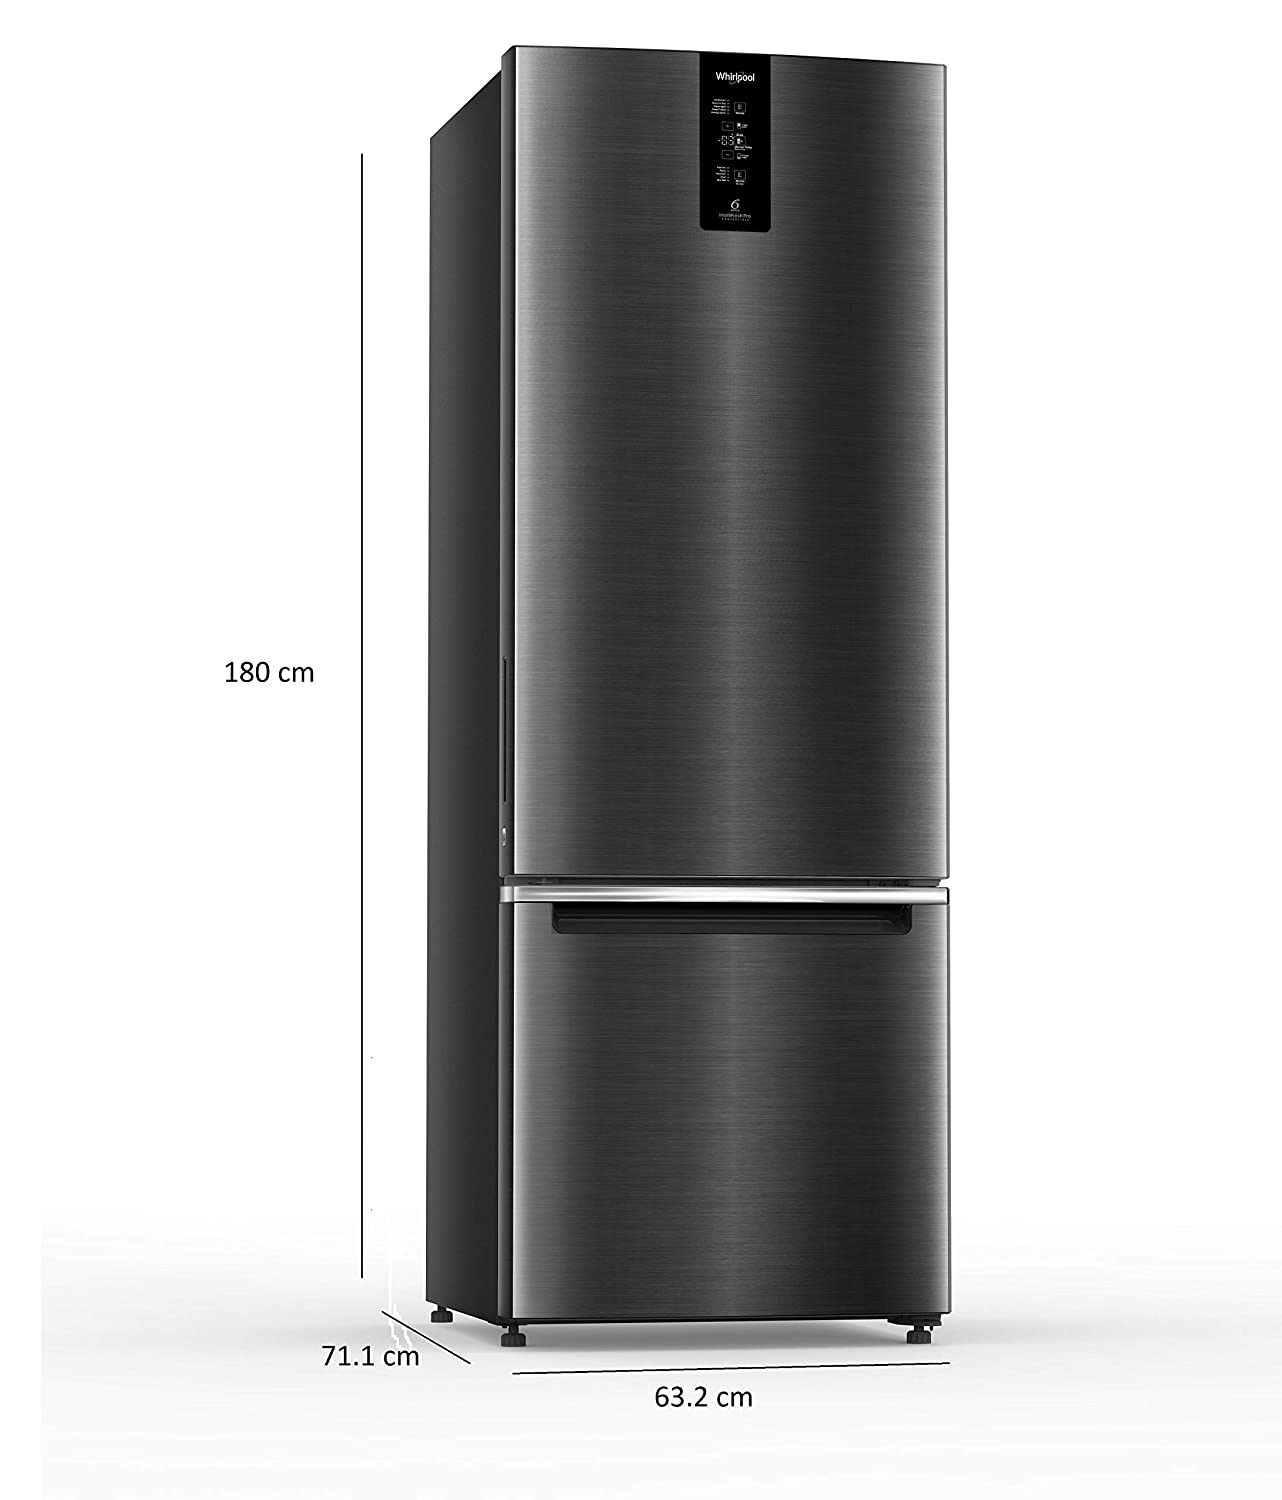 Whirlpool IFPRO INV CNV 370 3S 353L 3 Star Frost Free Double Door Refrigerator, Steel Onyx (21394)